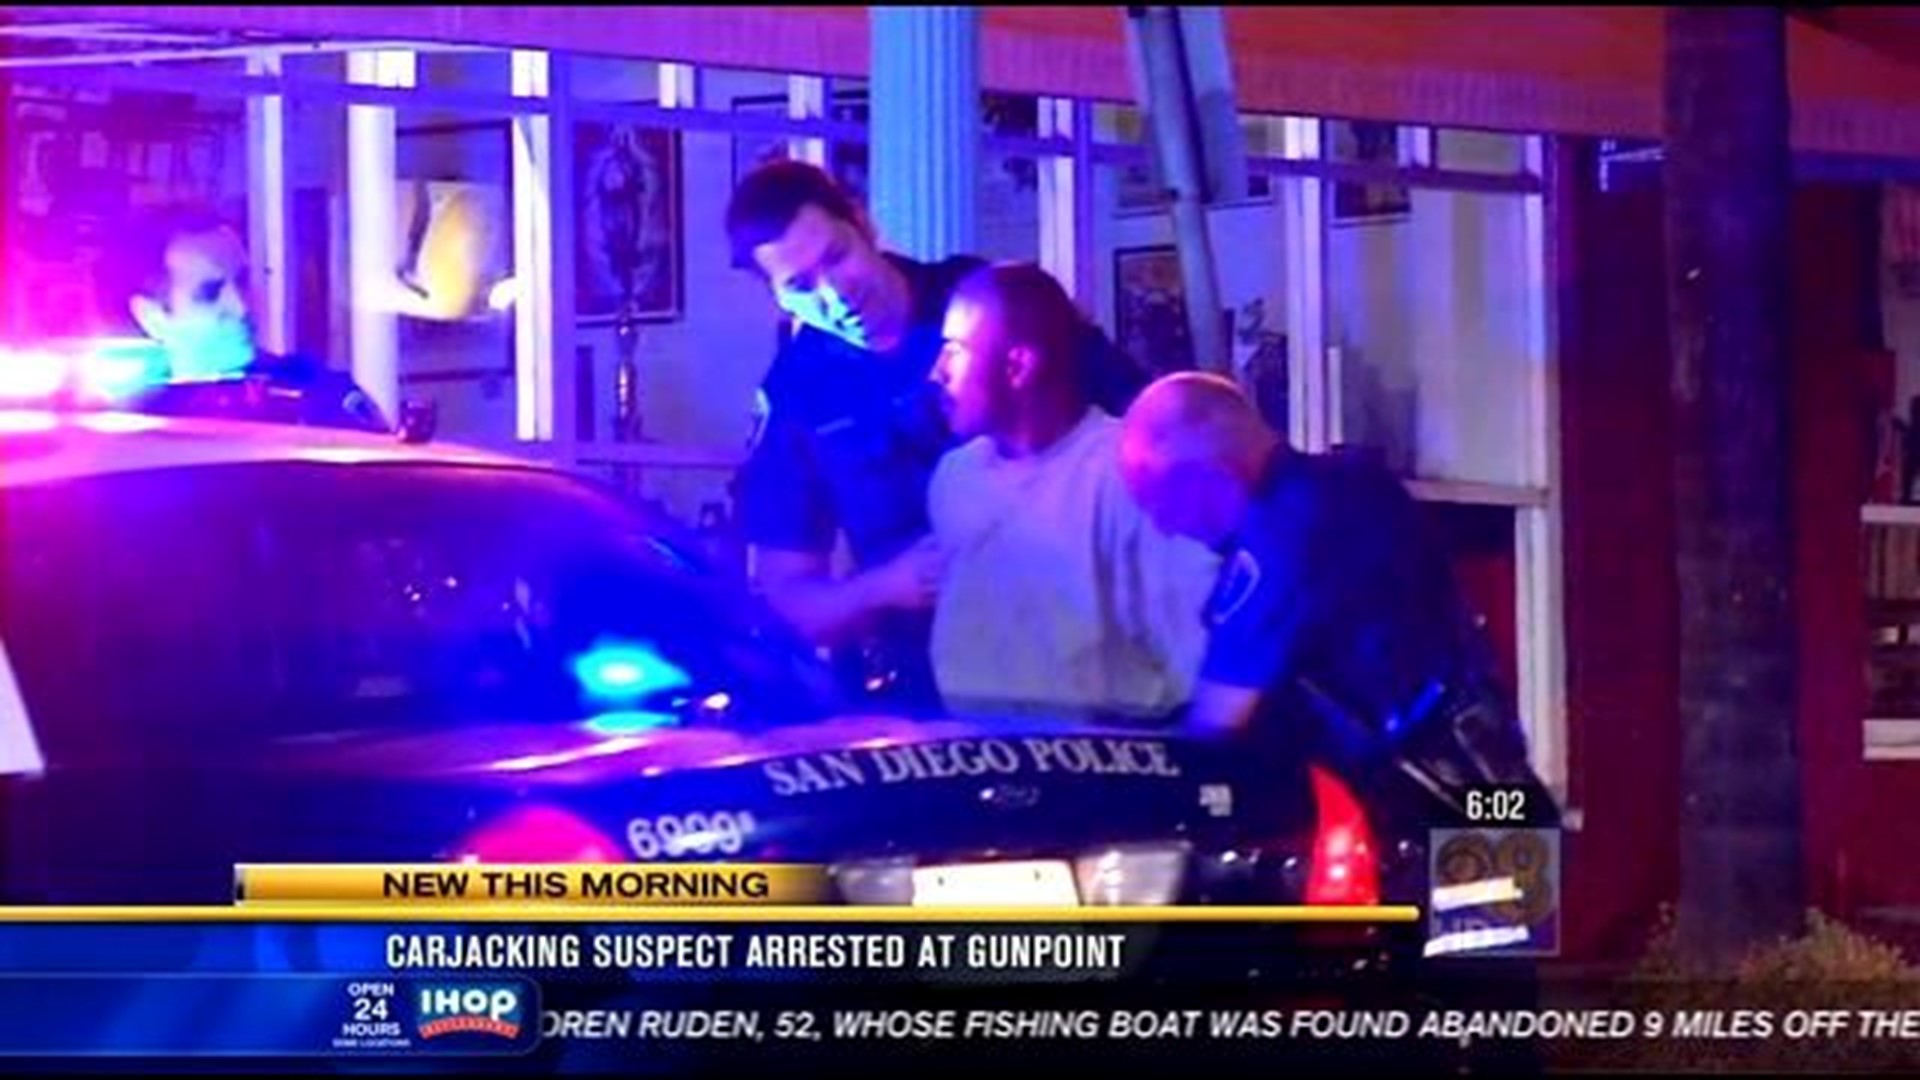 Carjacking Suspect Arrested At Gunpoint